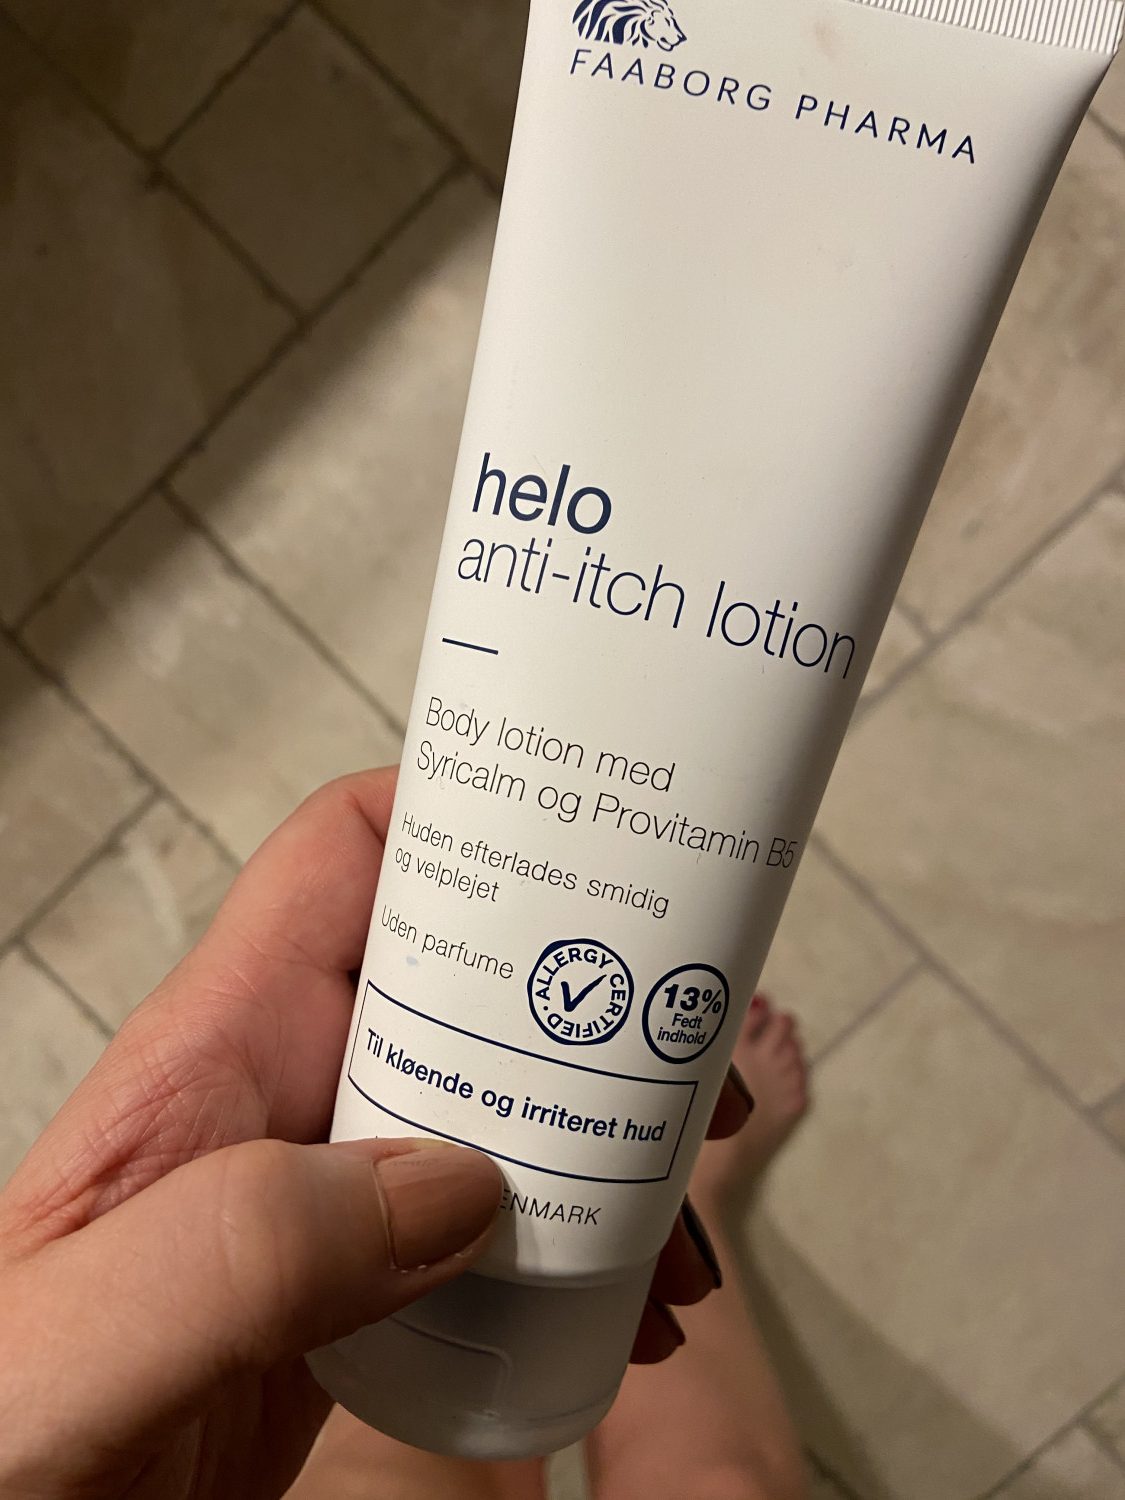 TEST af FAABORG PHARMA – HELO ANTI – ITCH Baby | Testfamilien